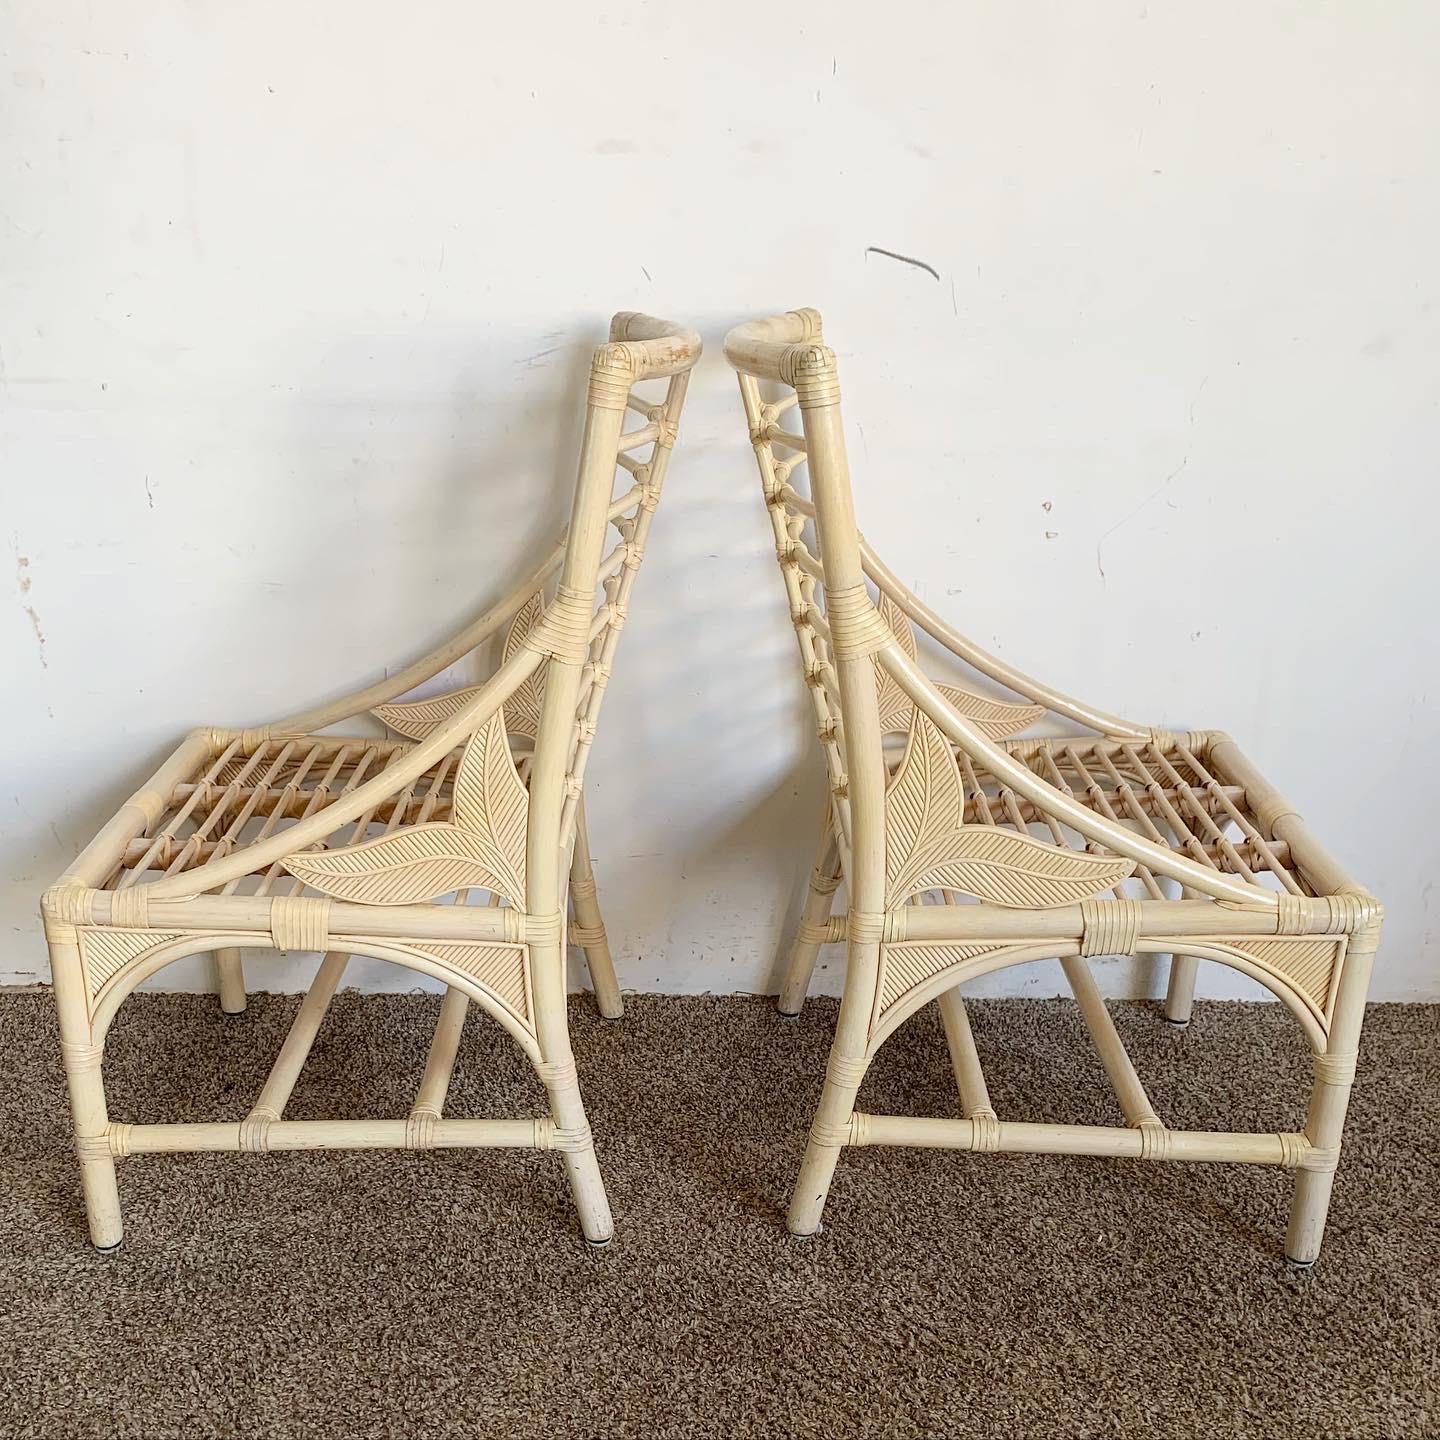 Boho Chic Bamboo Rattan Sculpted Pencil Reed Dining Chairs - Set of 4 In Good Condition For Sale In Delray Beach, FL